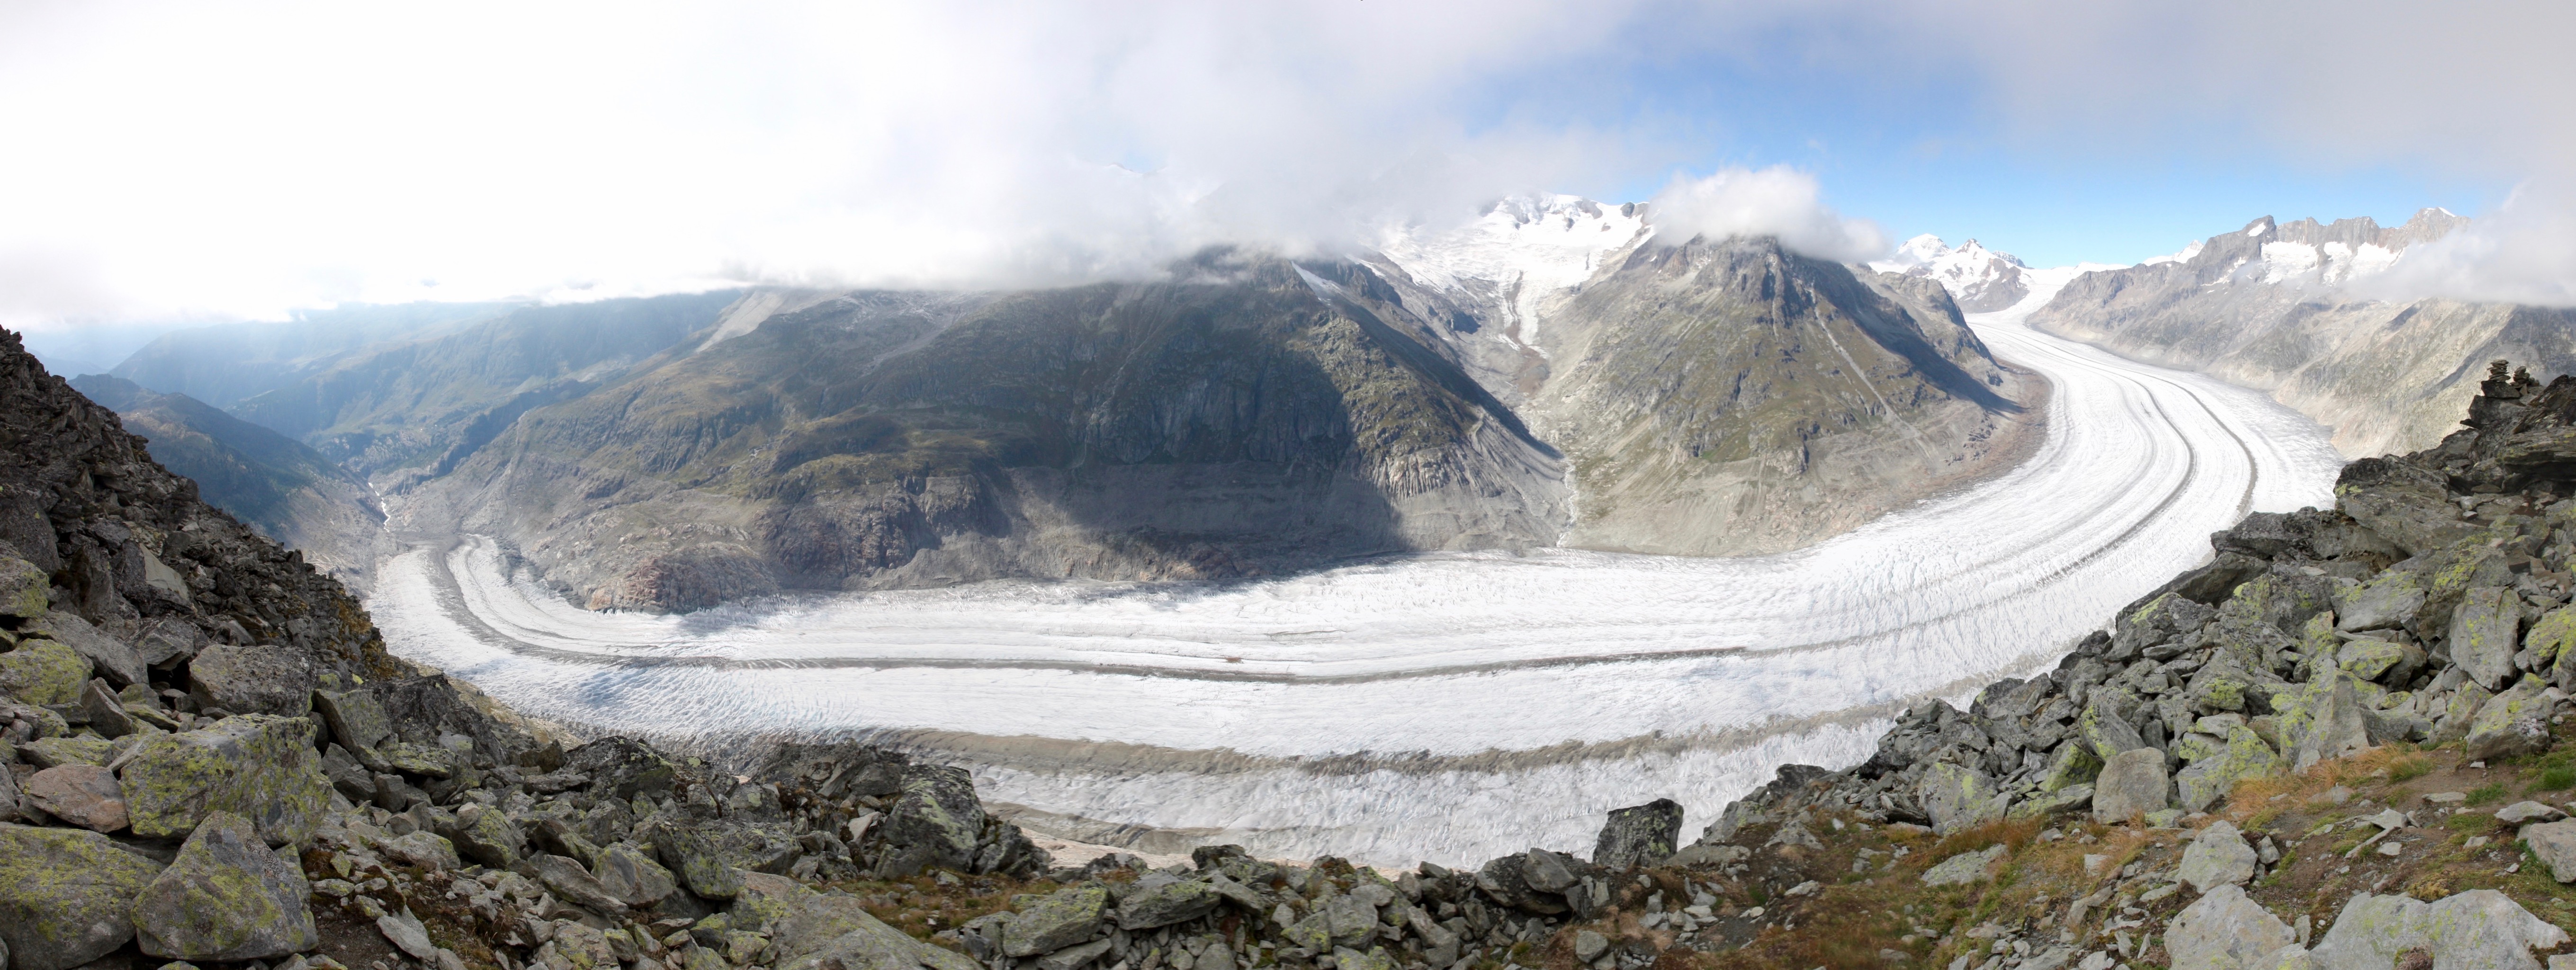 Panorama of the Aletsch Glacier near the end of our trip close to Bettmerhorn.